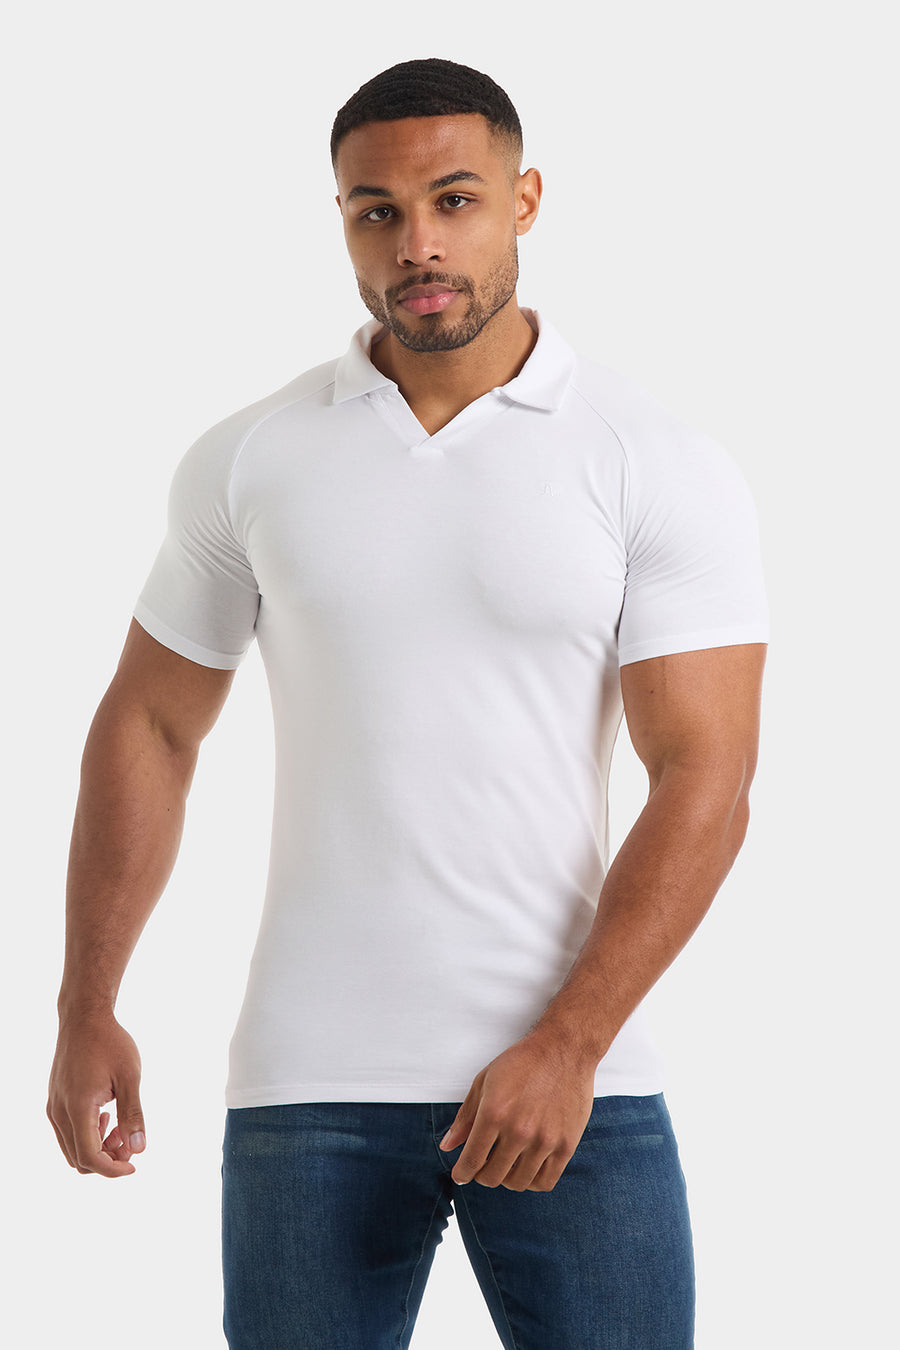 Jersey Buttonless Polo Shirt in White - TAILORED ATHLETE - USA